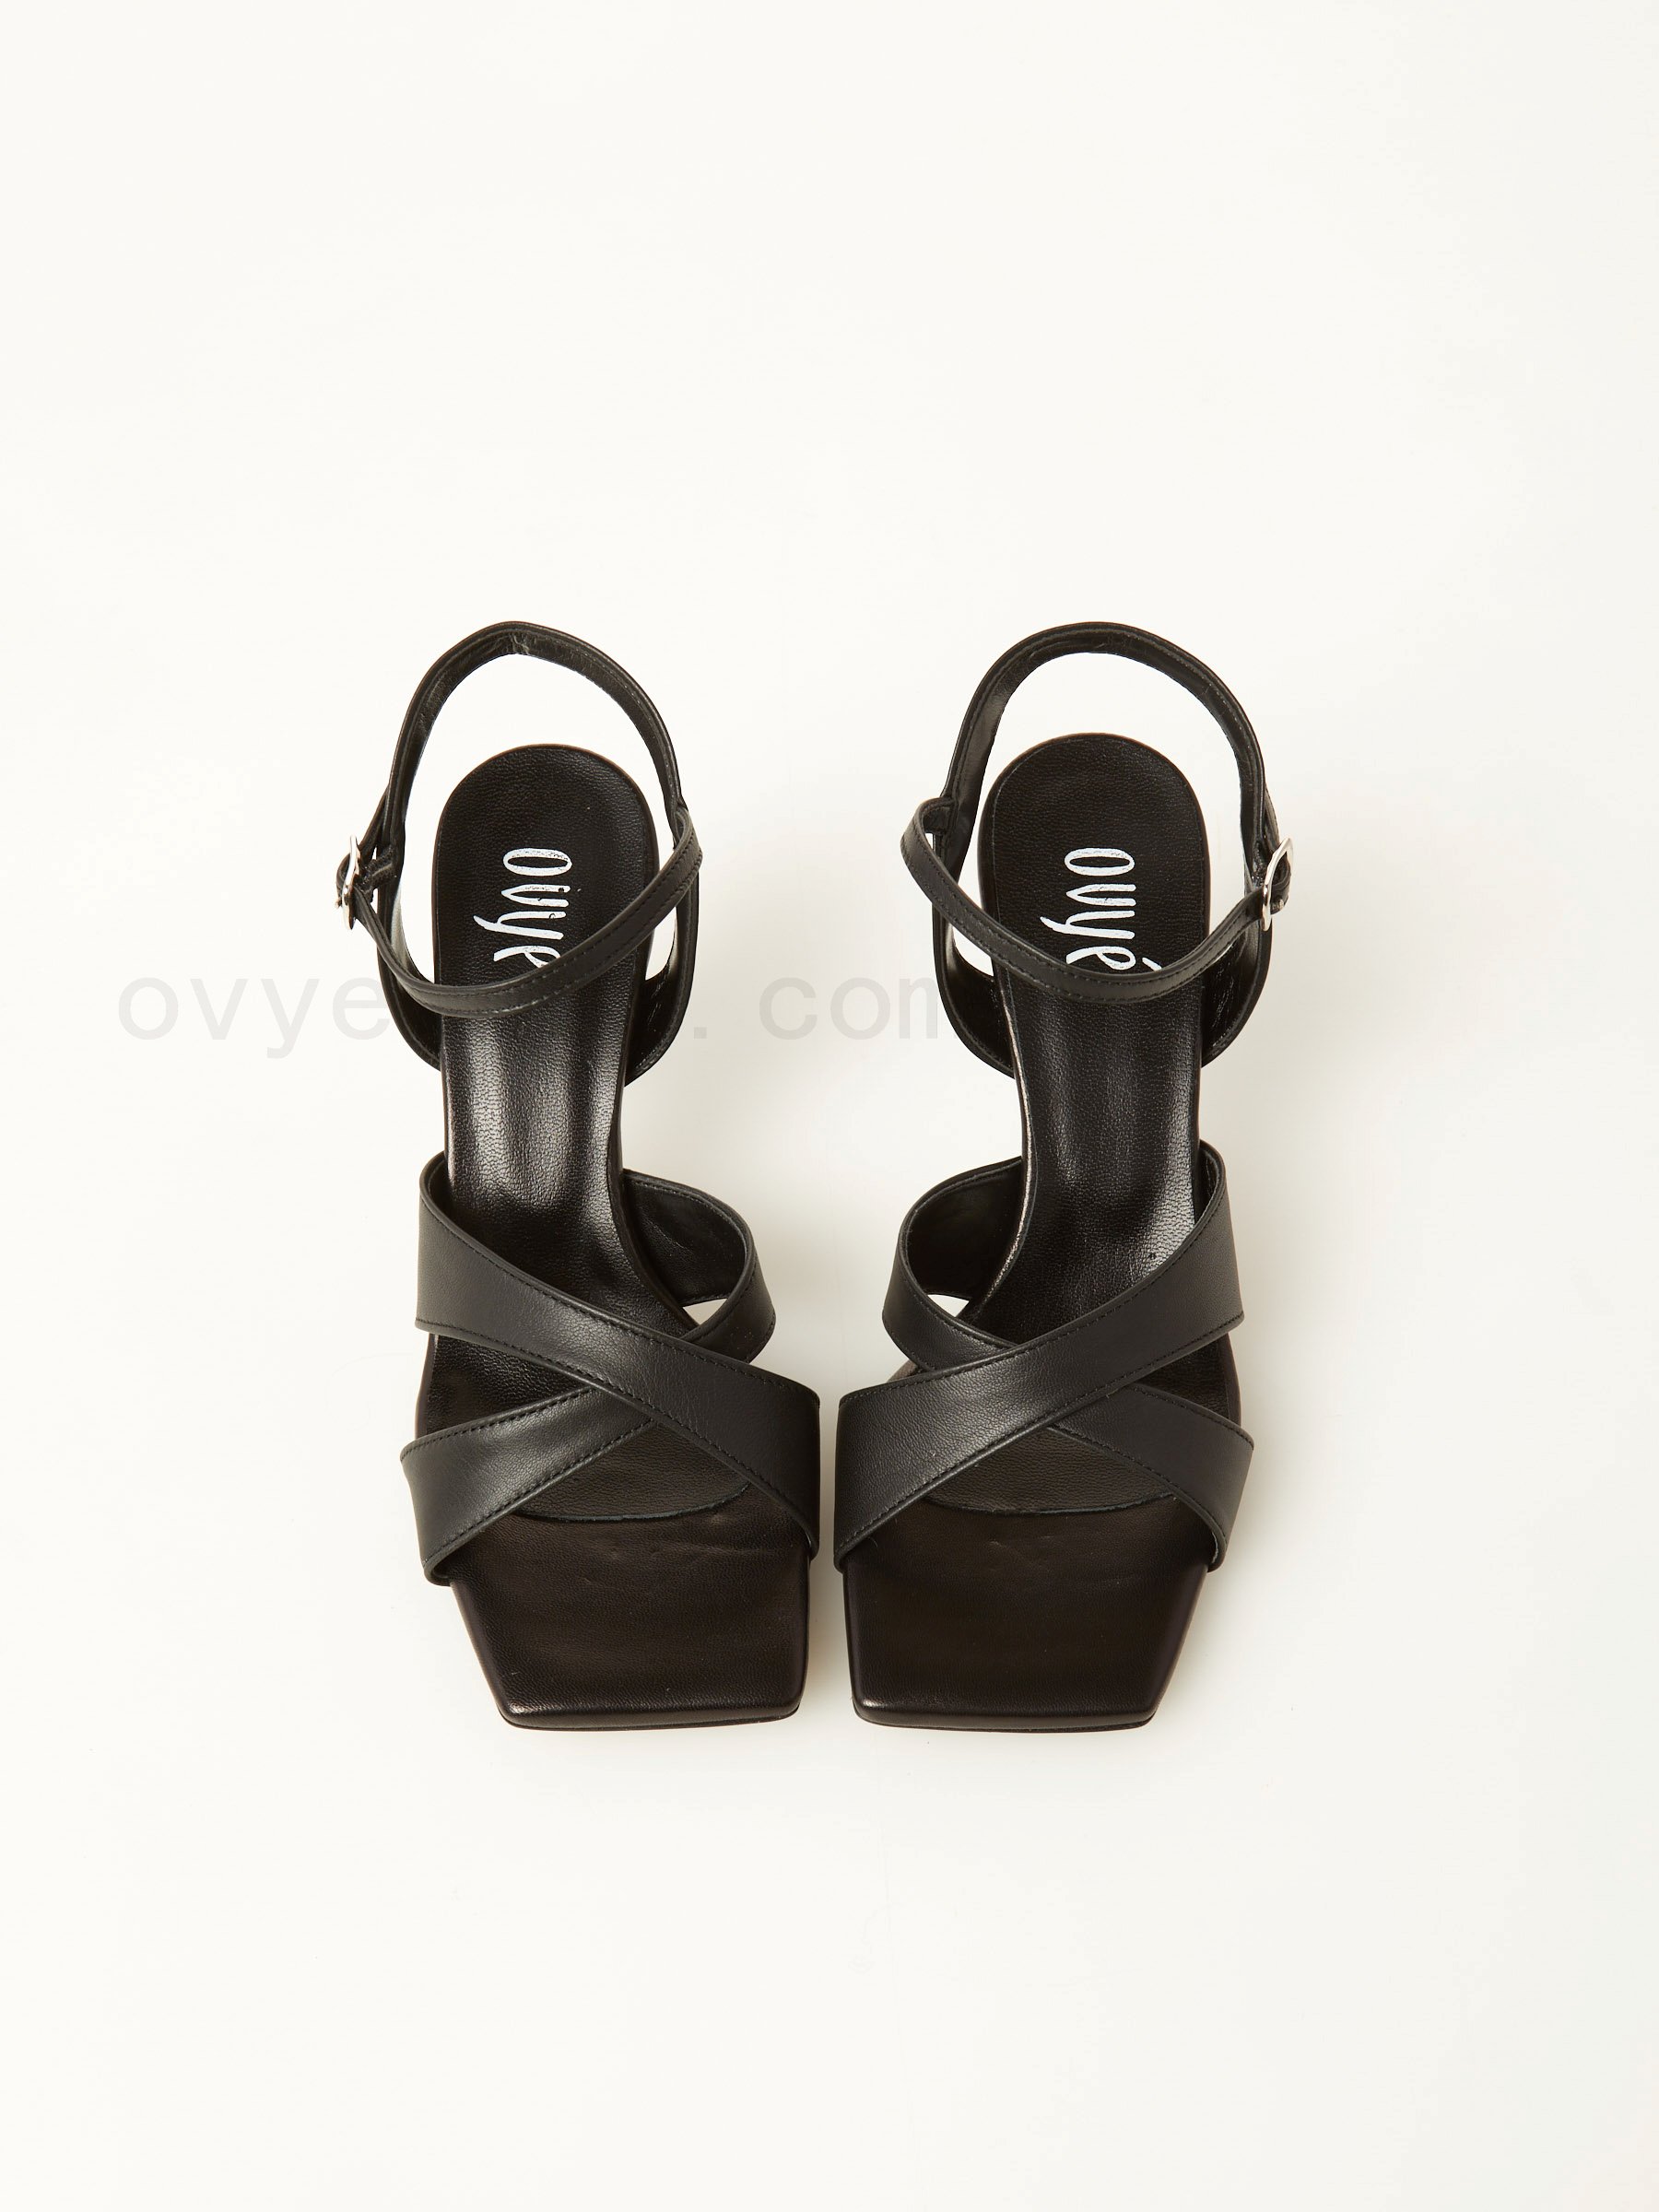 Outlet Sconti Online Leather Heel Sandal F0817885-0583 Genuino